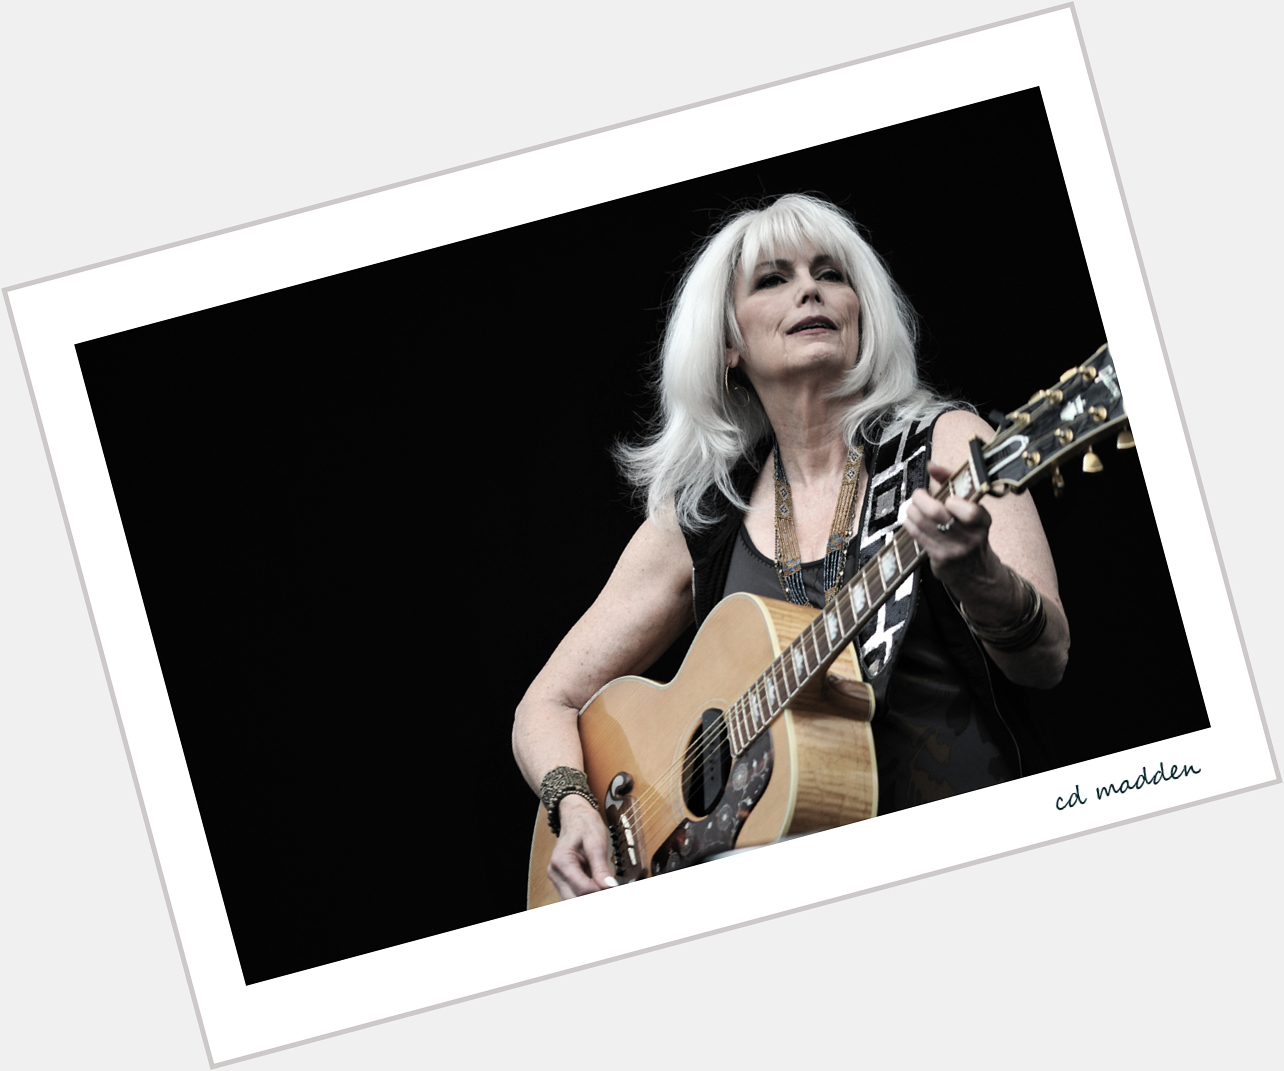 Happy Birthday Emmylou Harris, a great artist with the voice of an angel. 